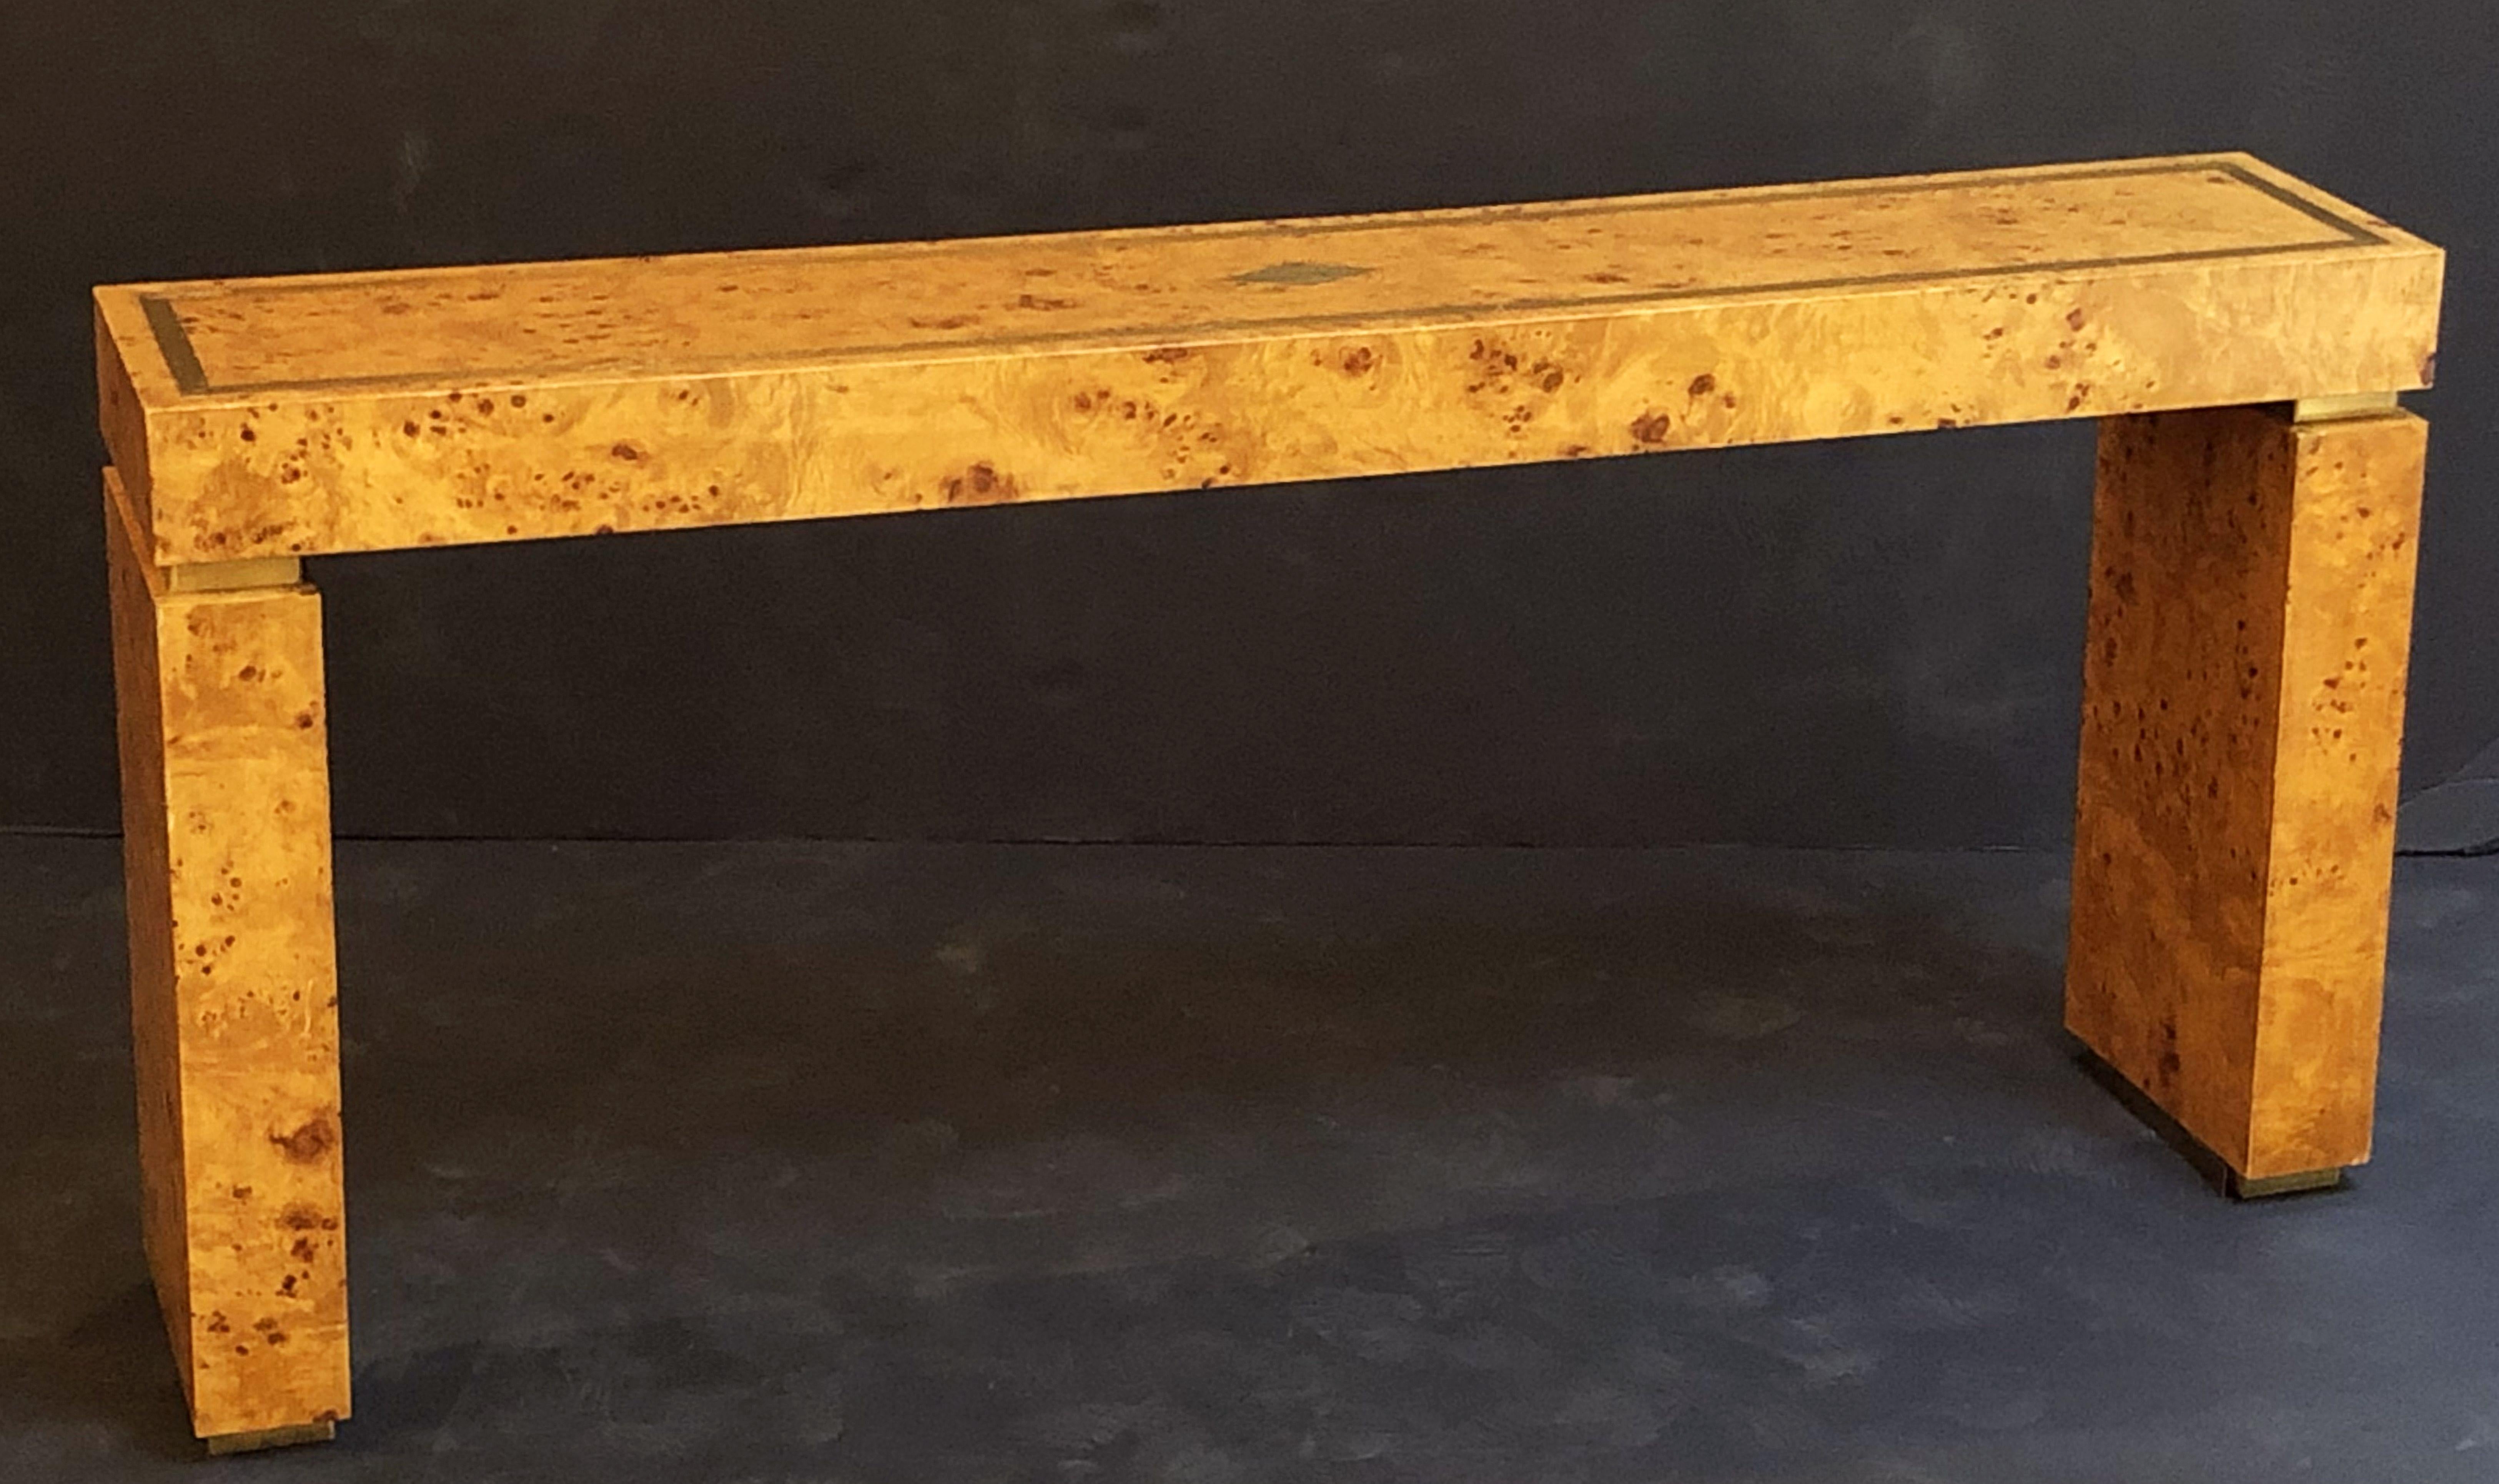 20th Century French Art Deco Burr Wood Console Table Attributed to Jean Claude Mahey